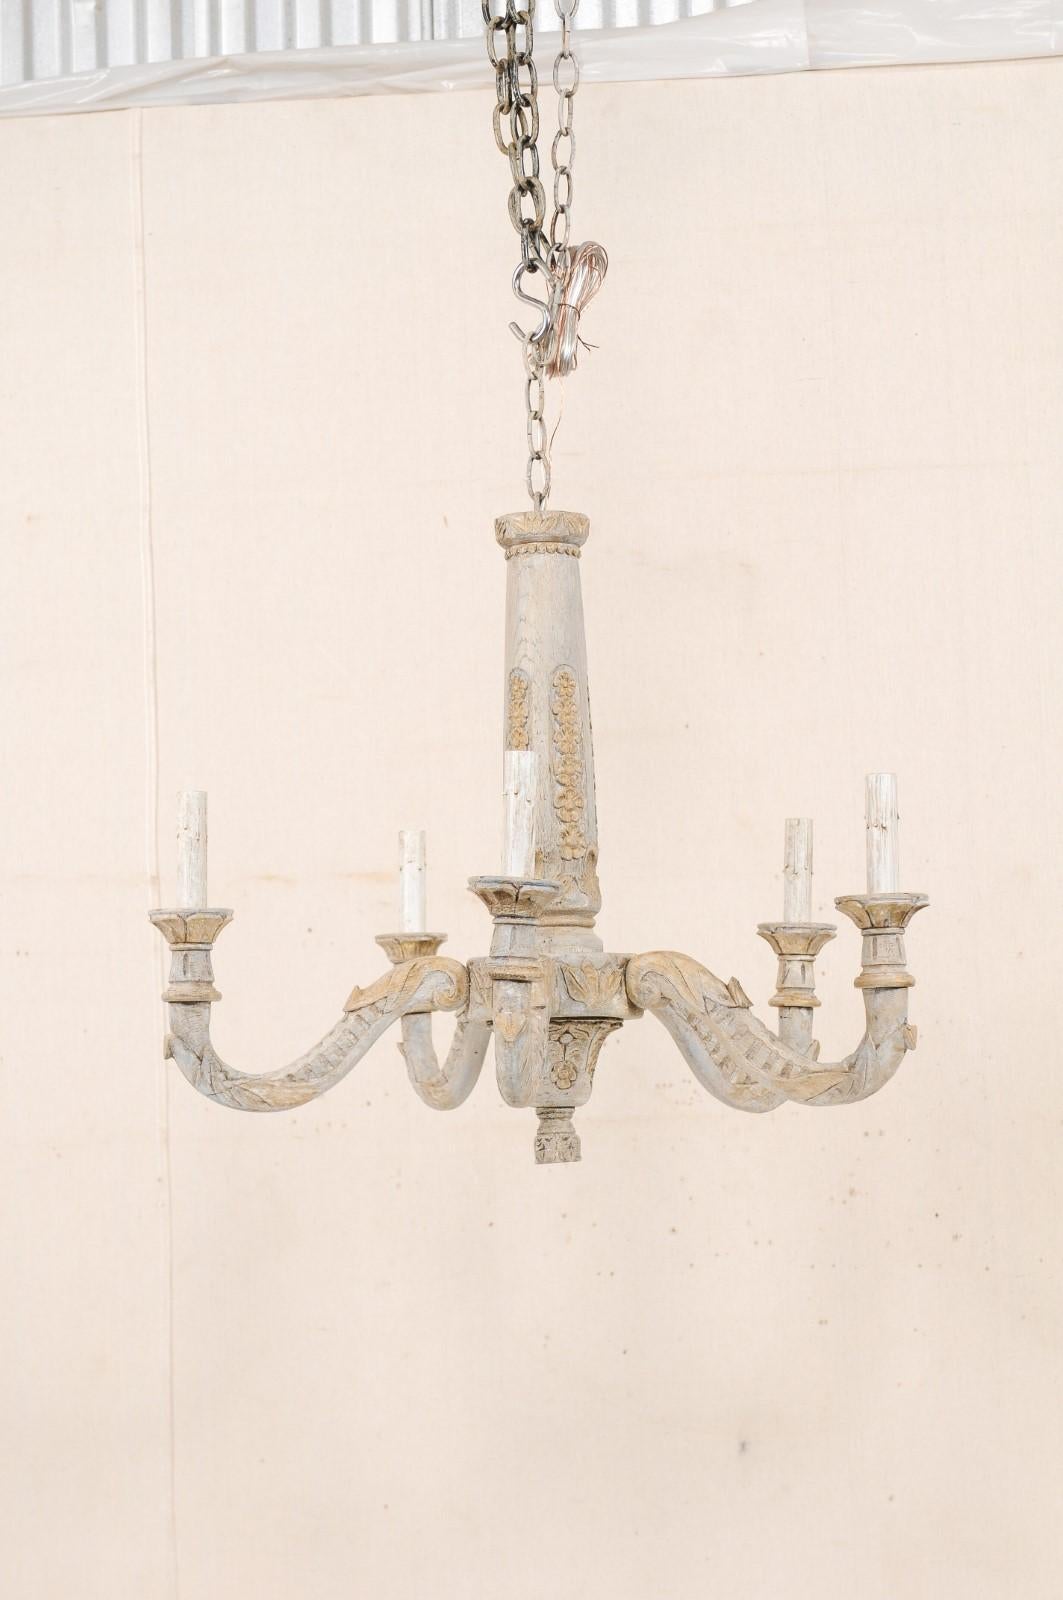 A French five-light carved-wood chandelier from the mid-20th century. This vintage chandelier from France has a central column, nicely carved with petite flower heads set vertically about it's perimeter, acanthus leaf motifs about it's central